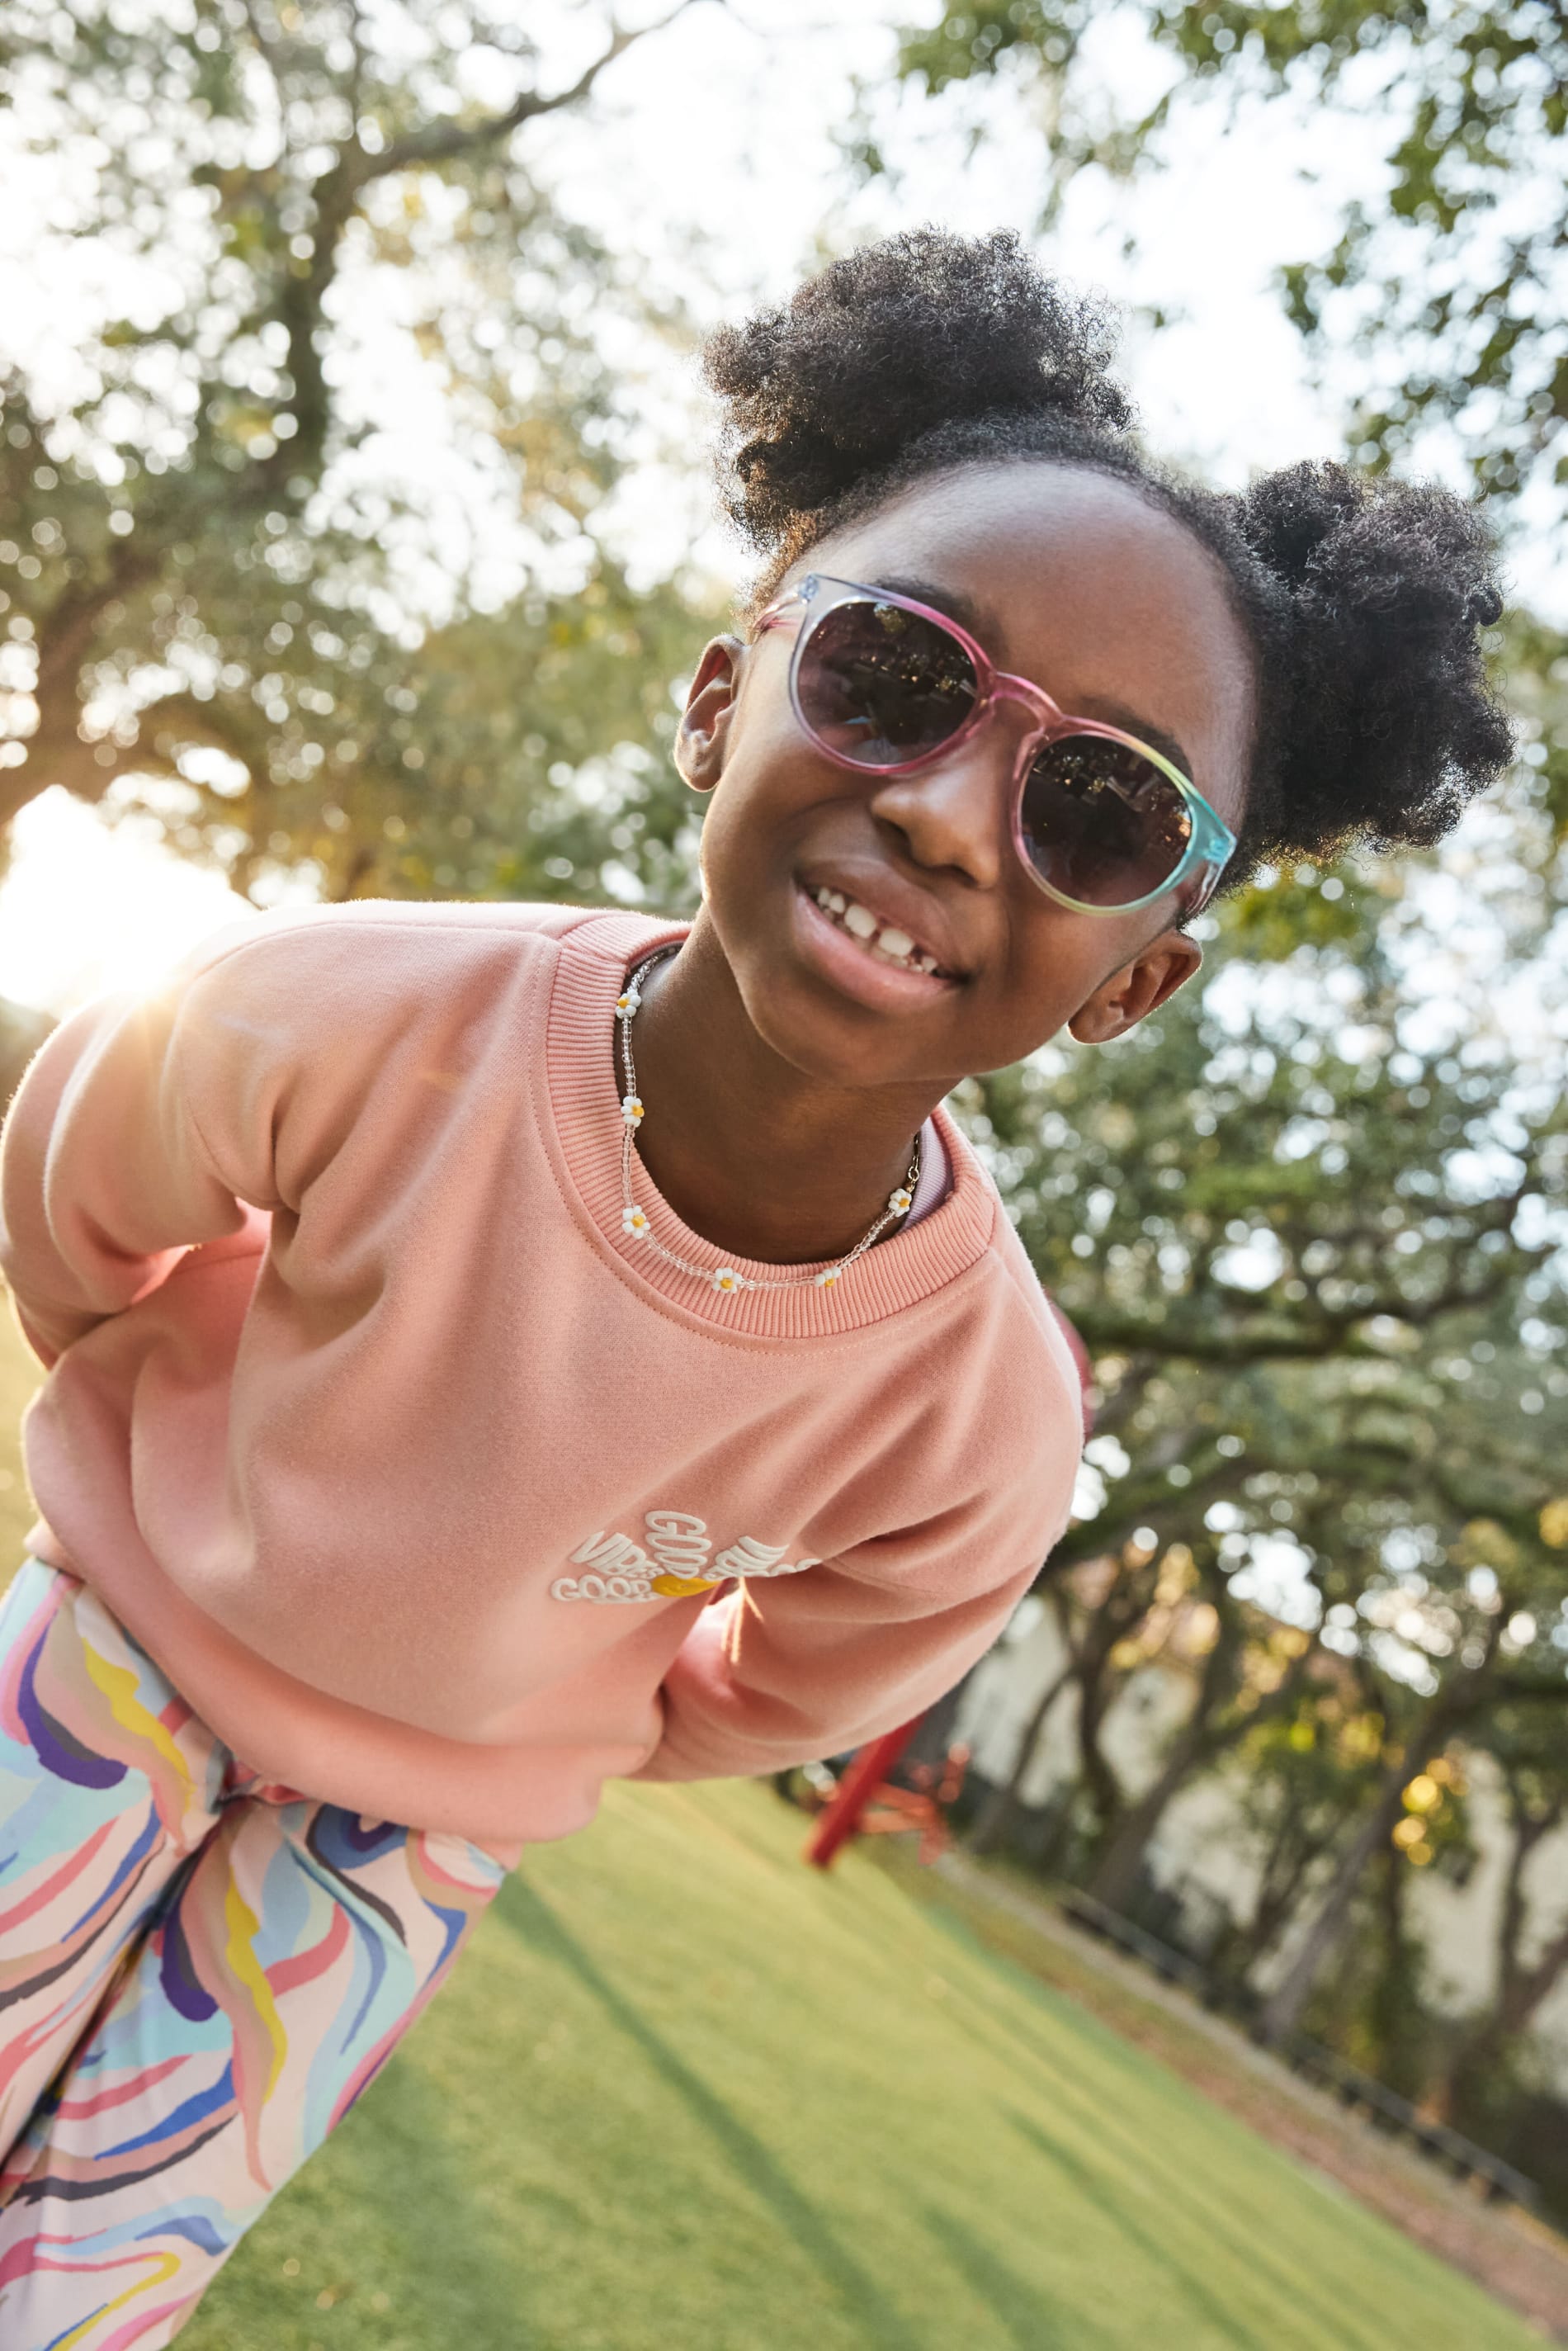 Kids: Girl in park wearing Stitch Fix pink sweatshirt and colorful leggings with sunglasses